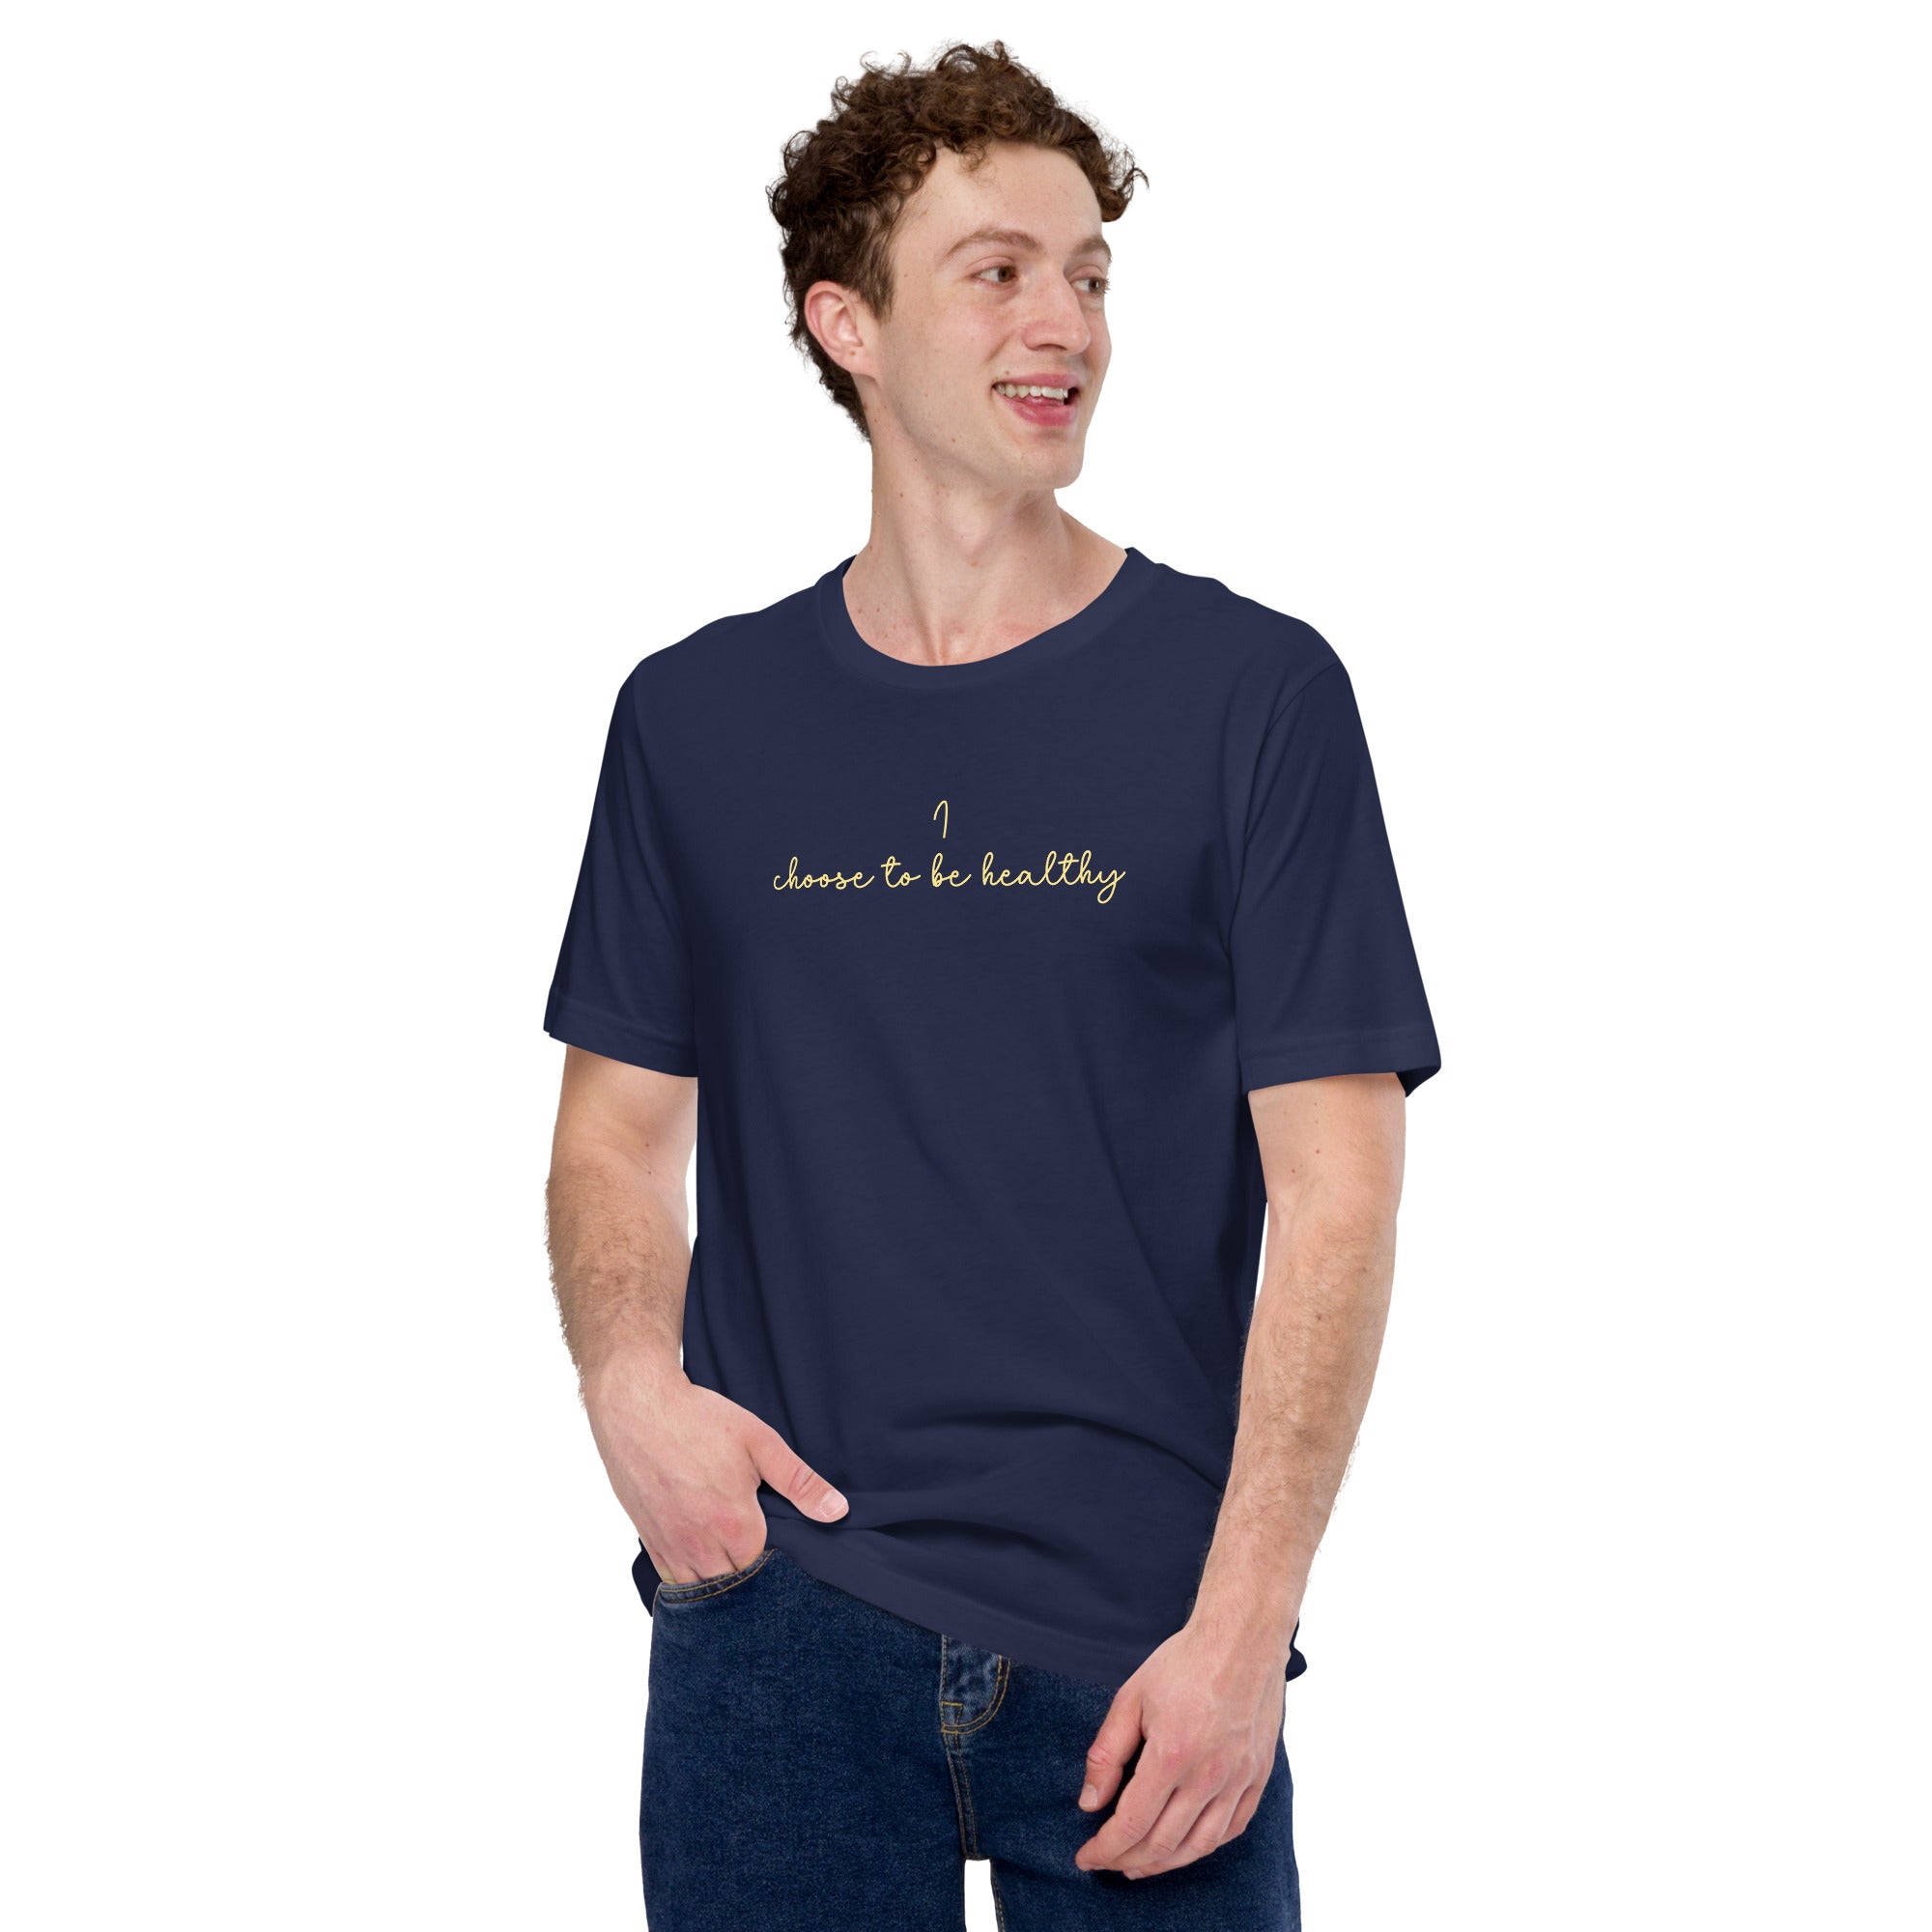 I Choose To Be Healthy, Premium Short-Sleeve Unisex T-Shirt | Positive Affirmation Tee